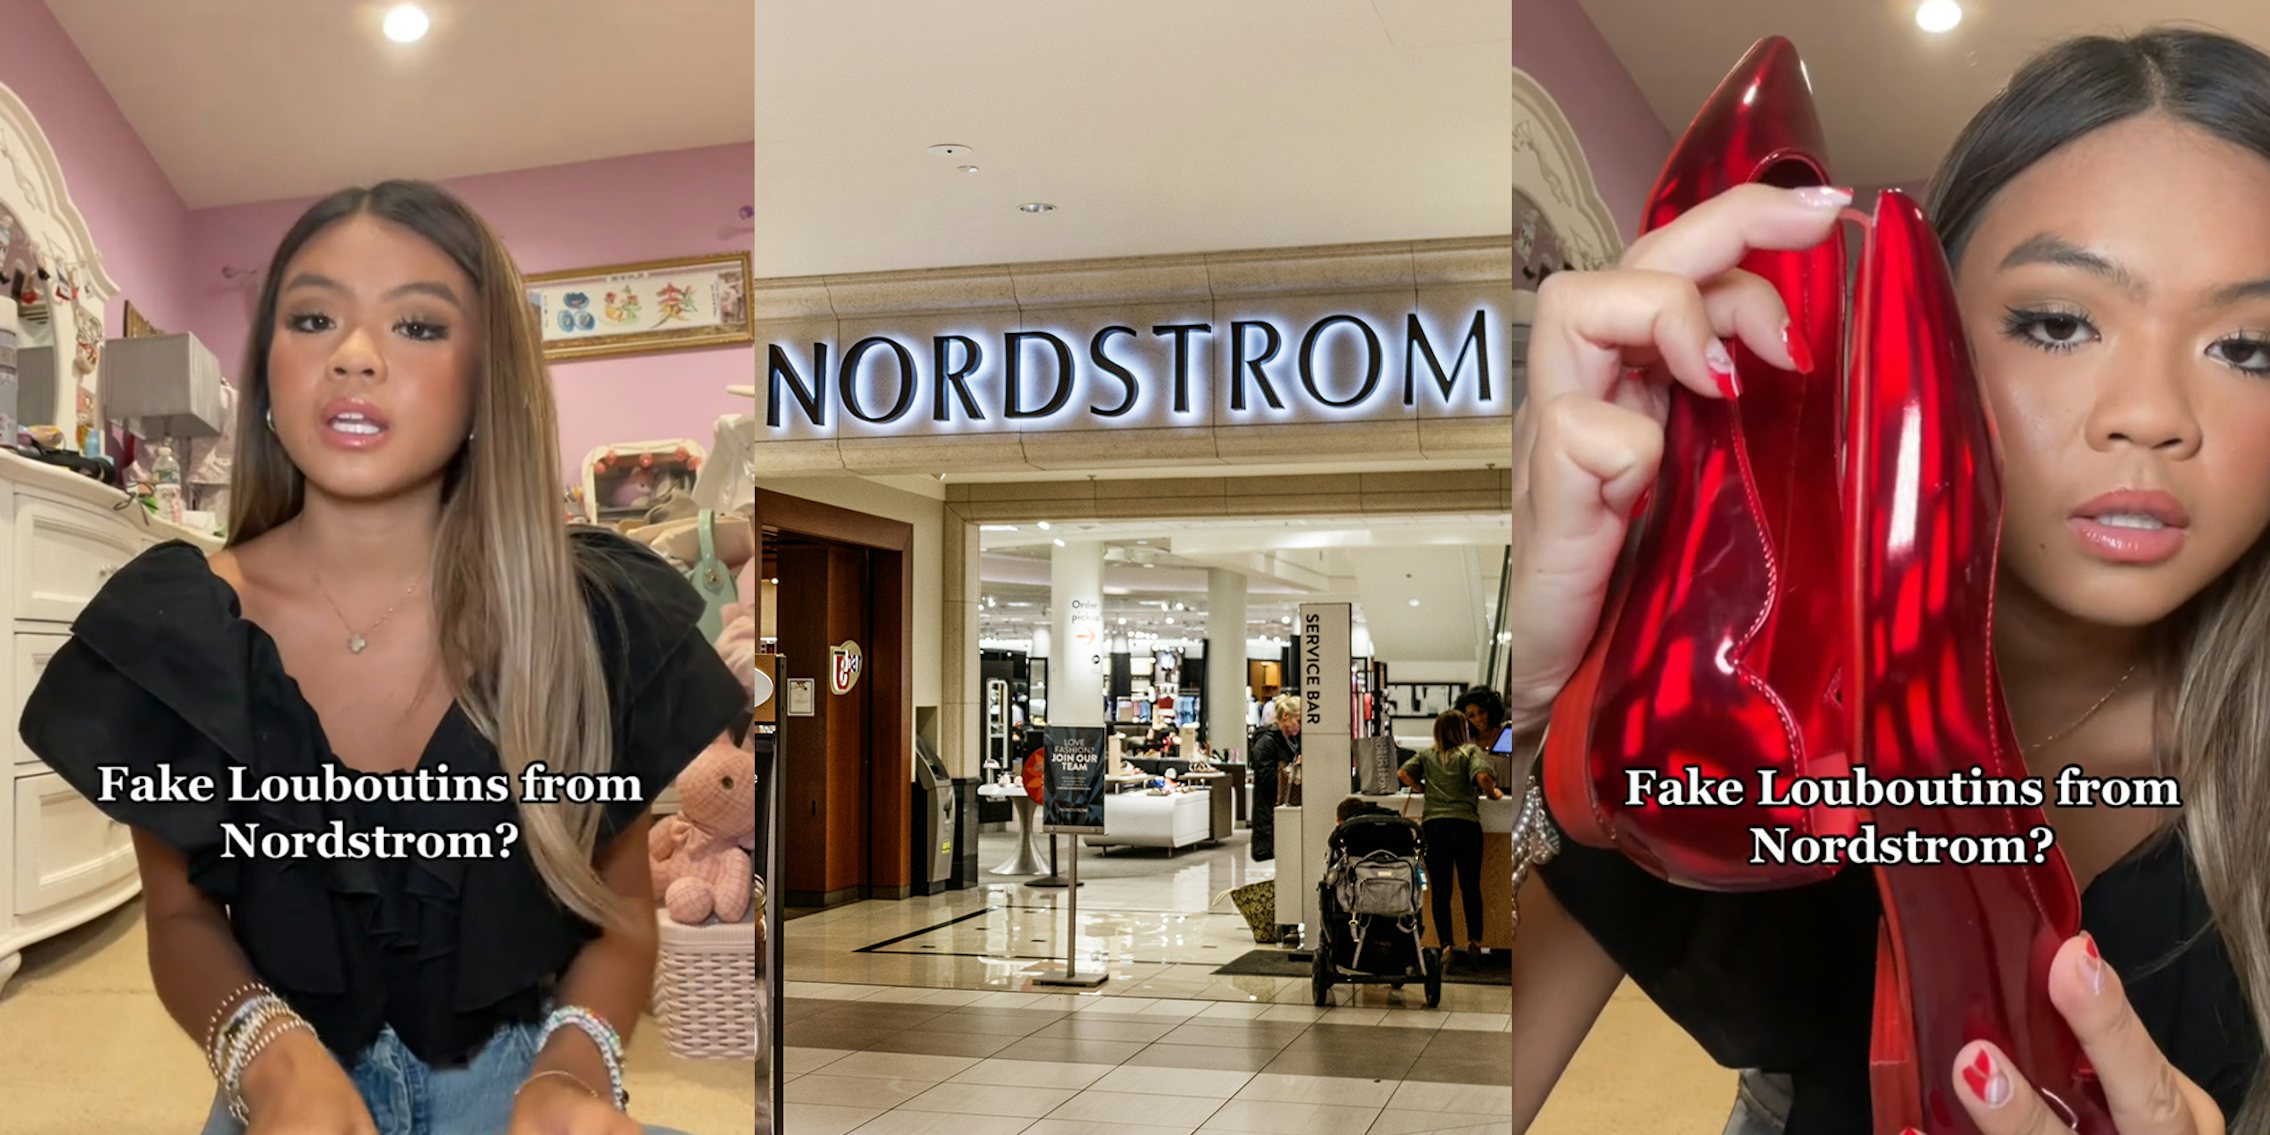 Customer suspects she may have unknowingly bought fake Louboutins from Nordstrom